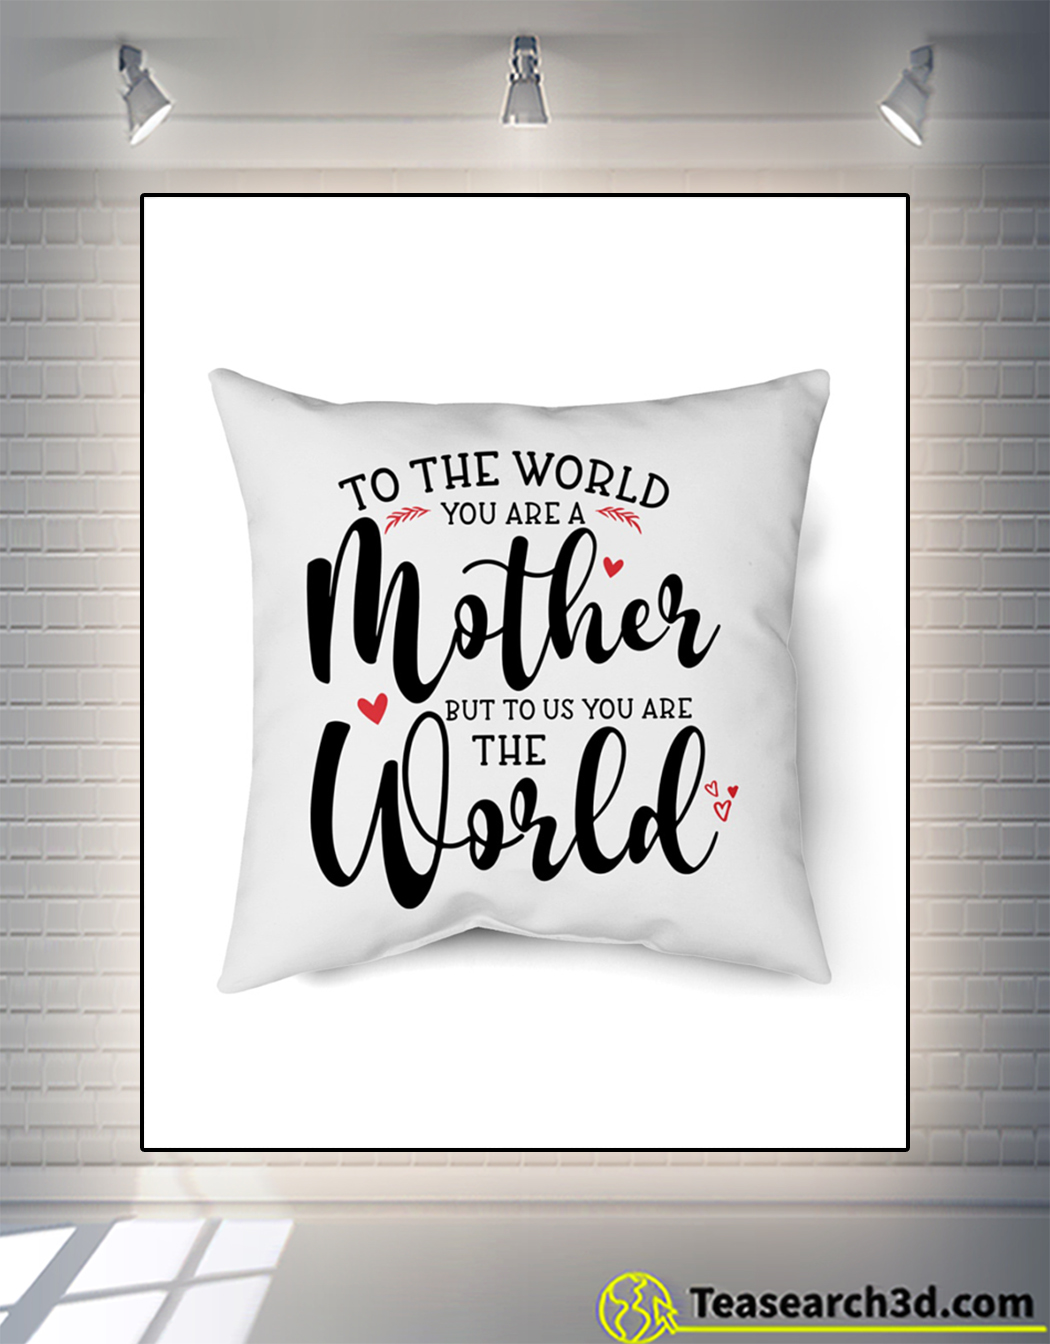 To the world you are a mother but to us you are the world pillow